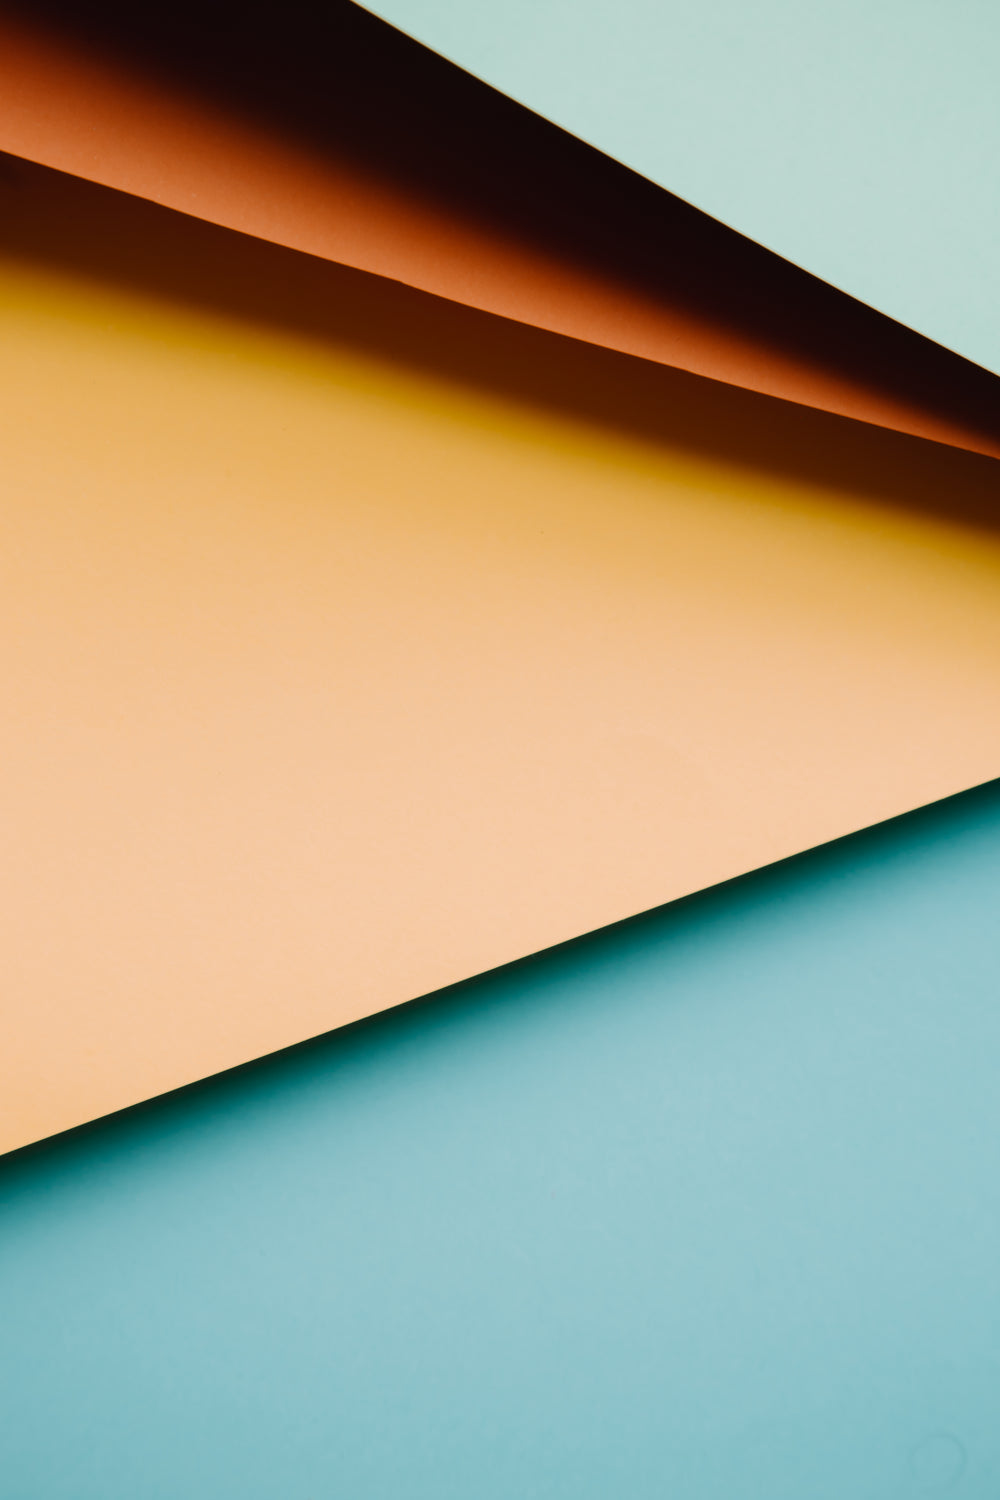 abstract image of colored paper creating horizontal lines